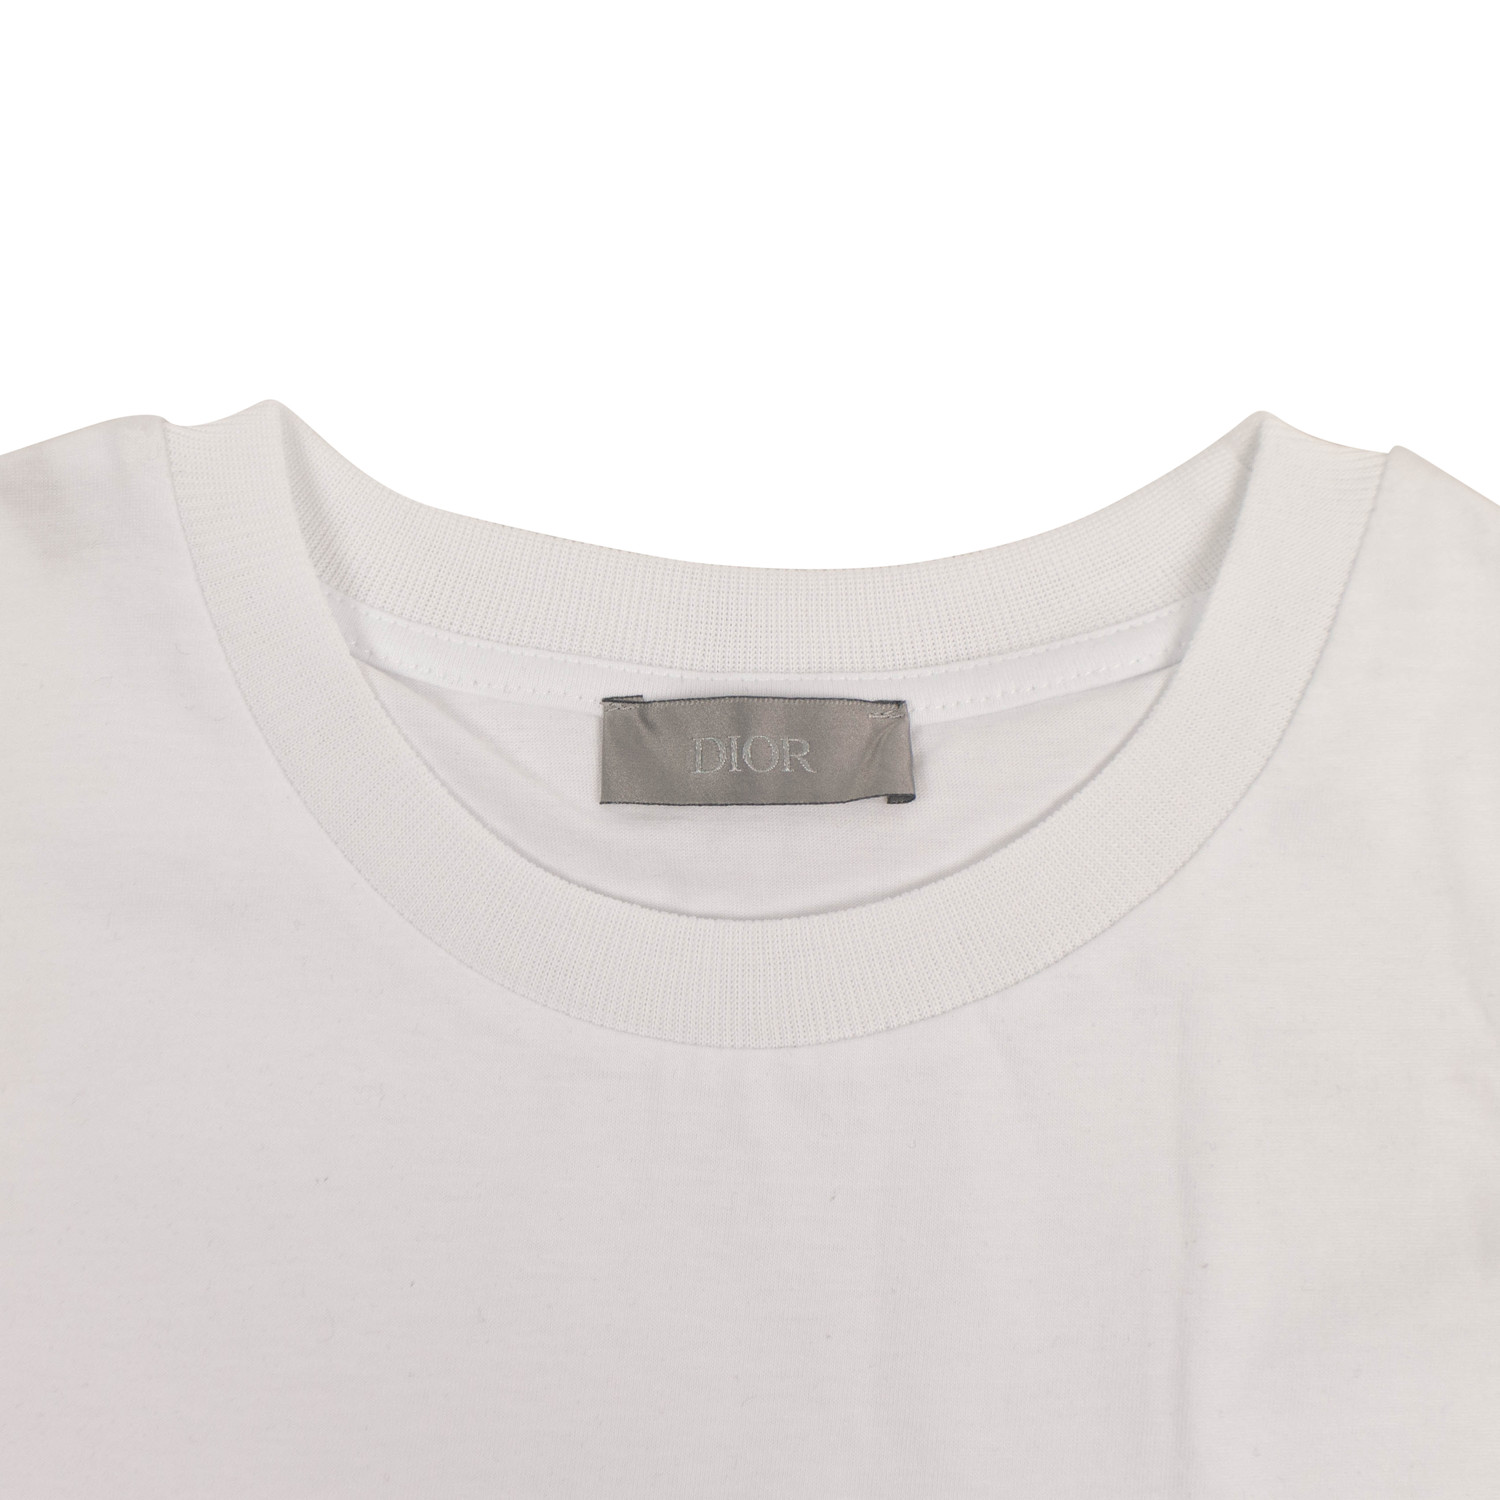 Christian Dior // Visitor Patch Short Sleeve Cotton T-Shirt // White (L ...